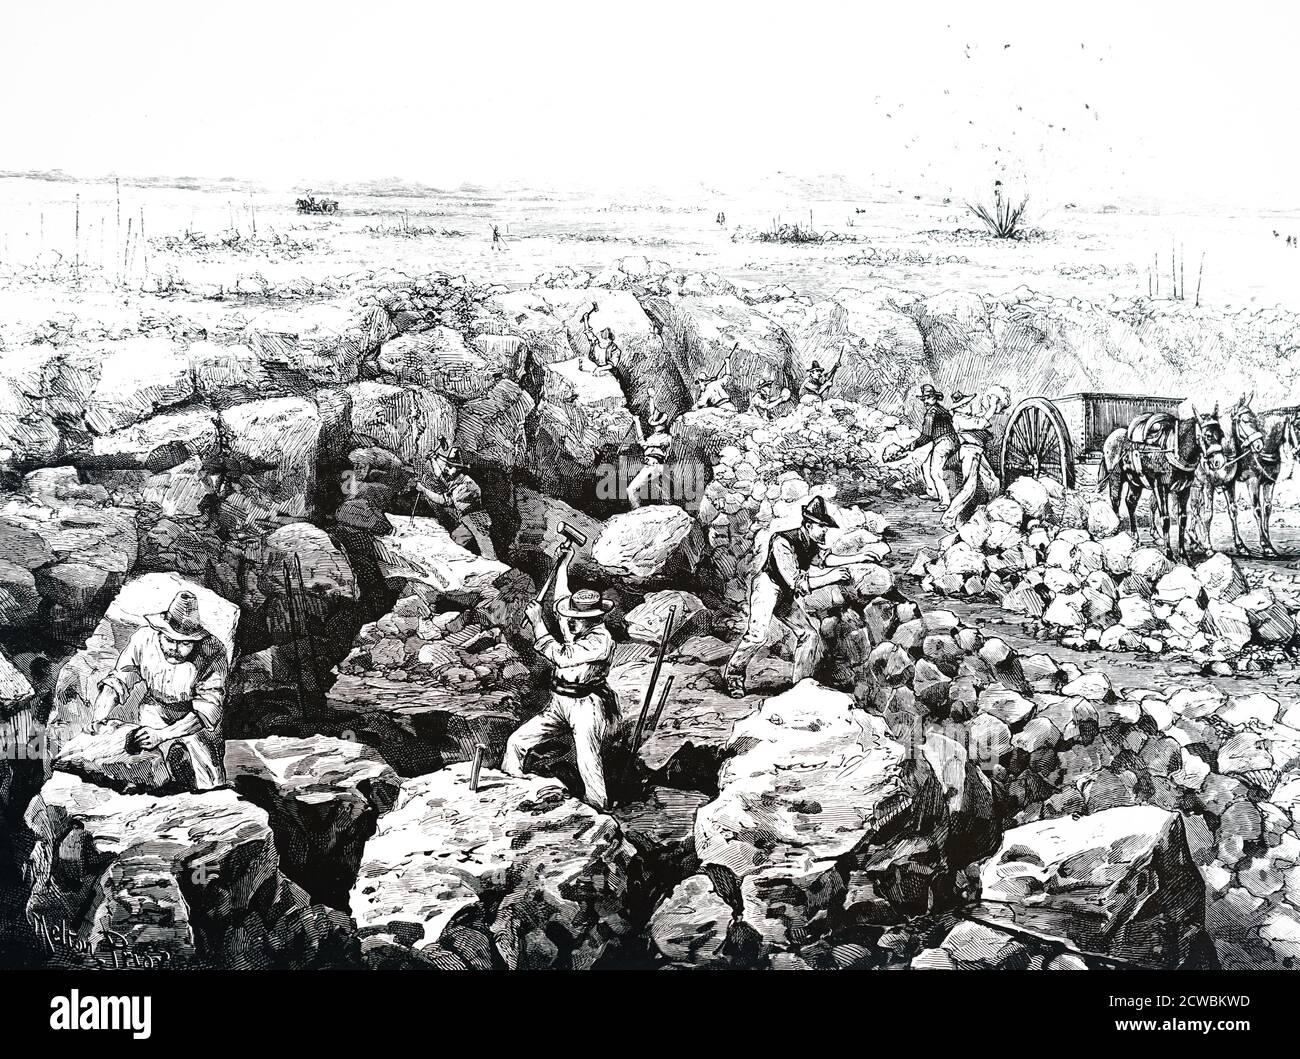 Engraving depicting the digging of caliche at Nitrate grounds in the province of Tarapaca, Chile. Stock Photo